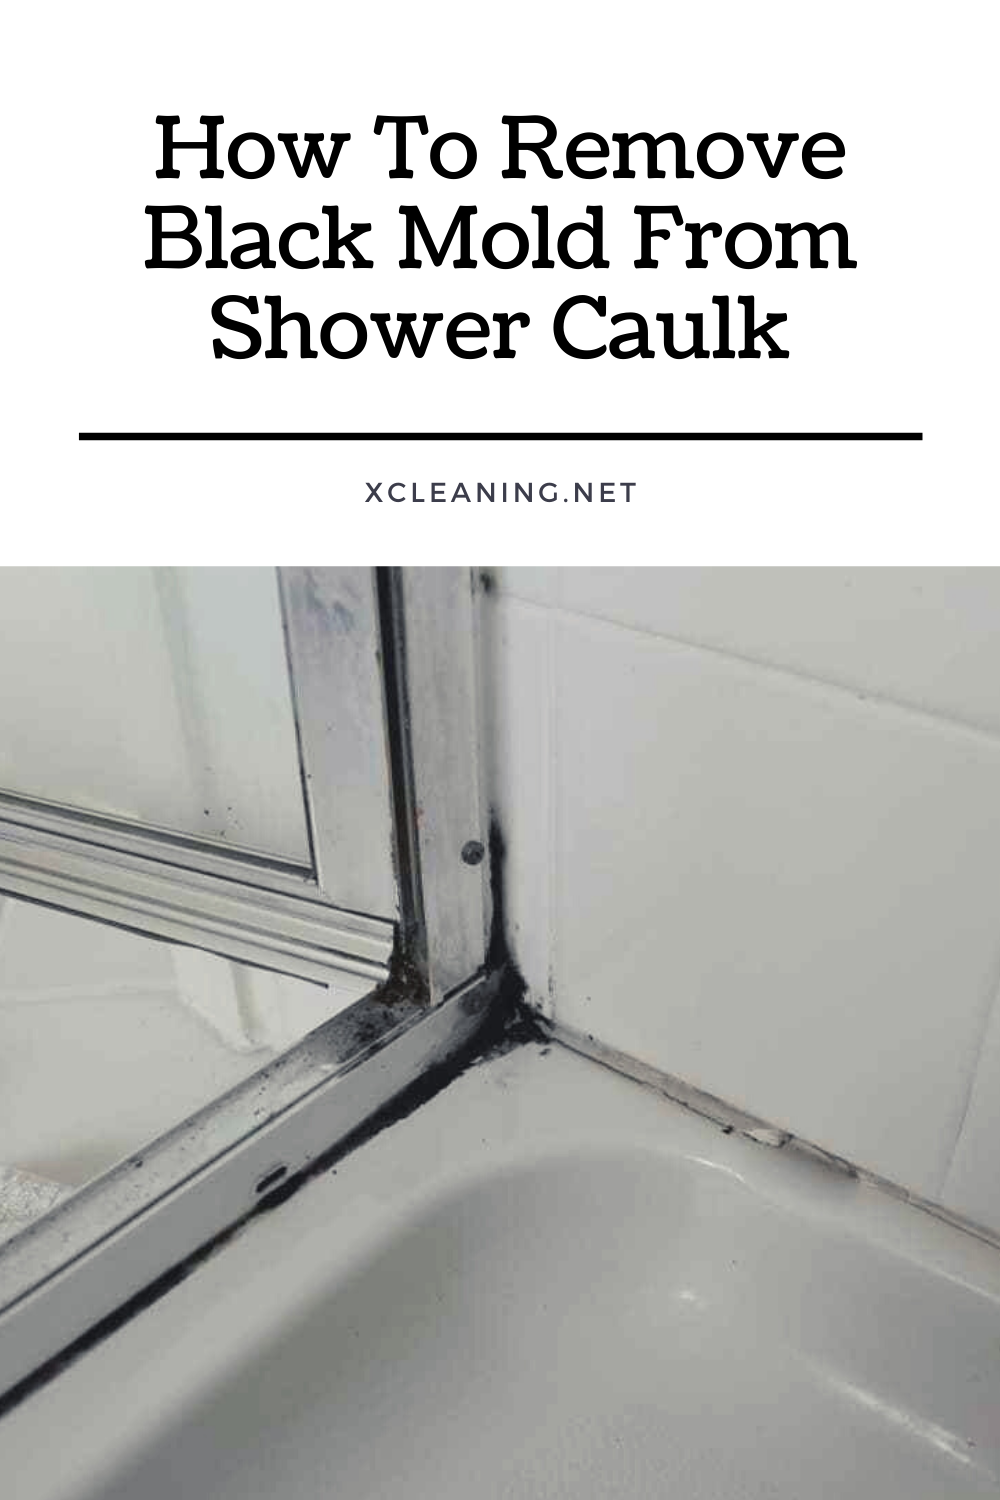 How To Remove Black Mold From Shower Caulk  xCleaning.net - Your